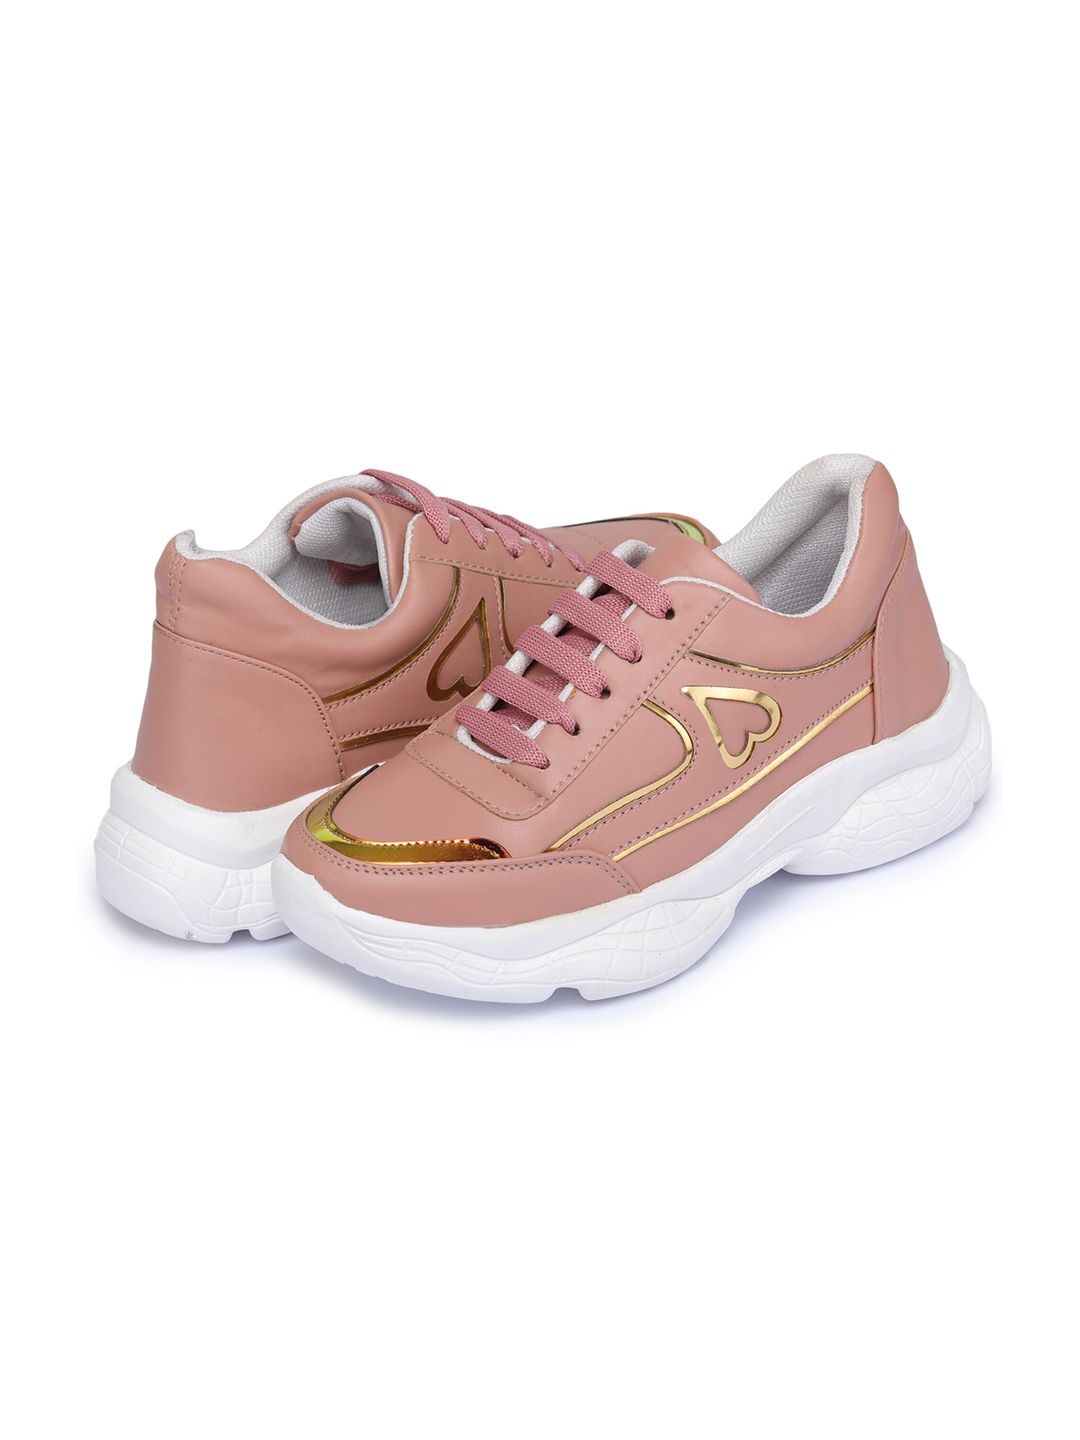 BOOTCO Women Peach-Coloured Sneakers Price in India